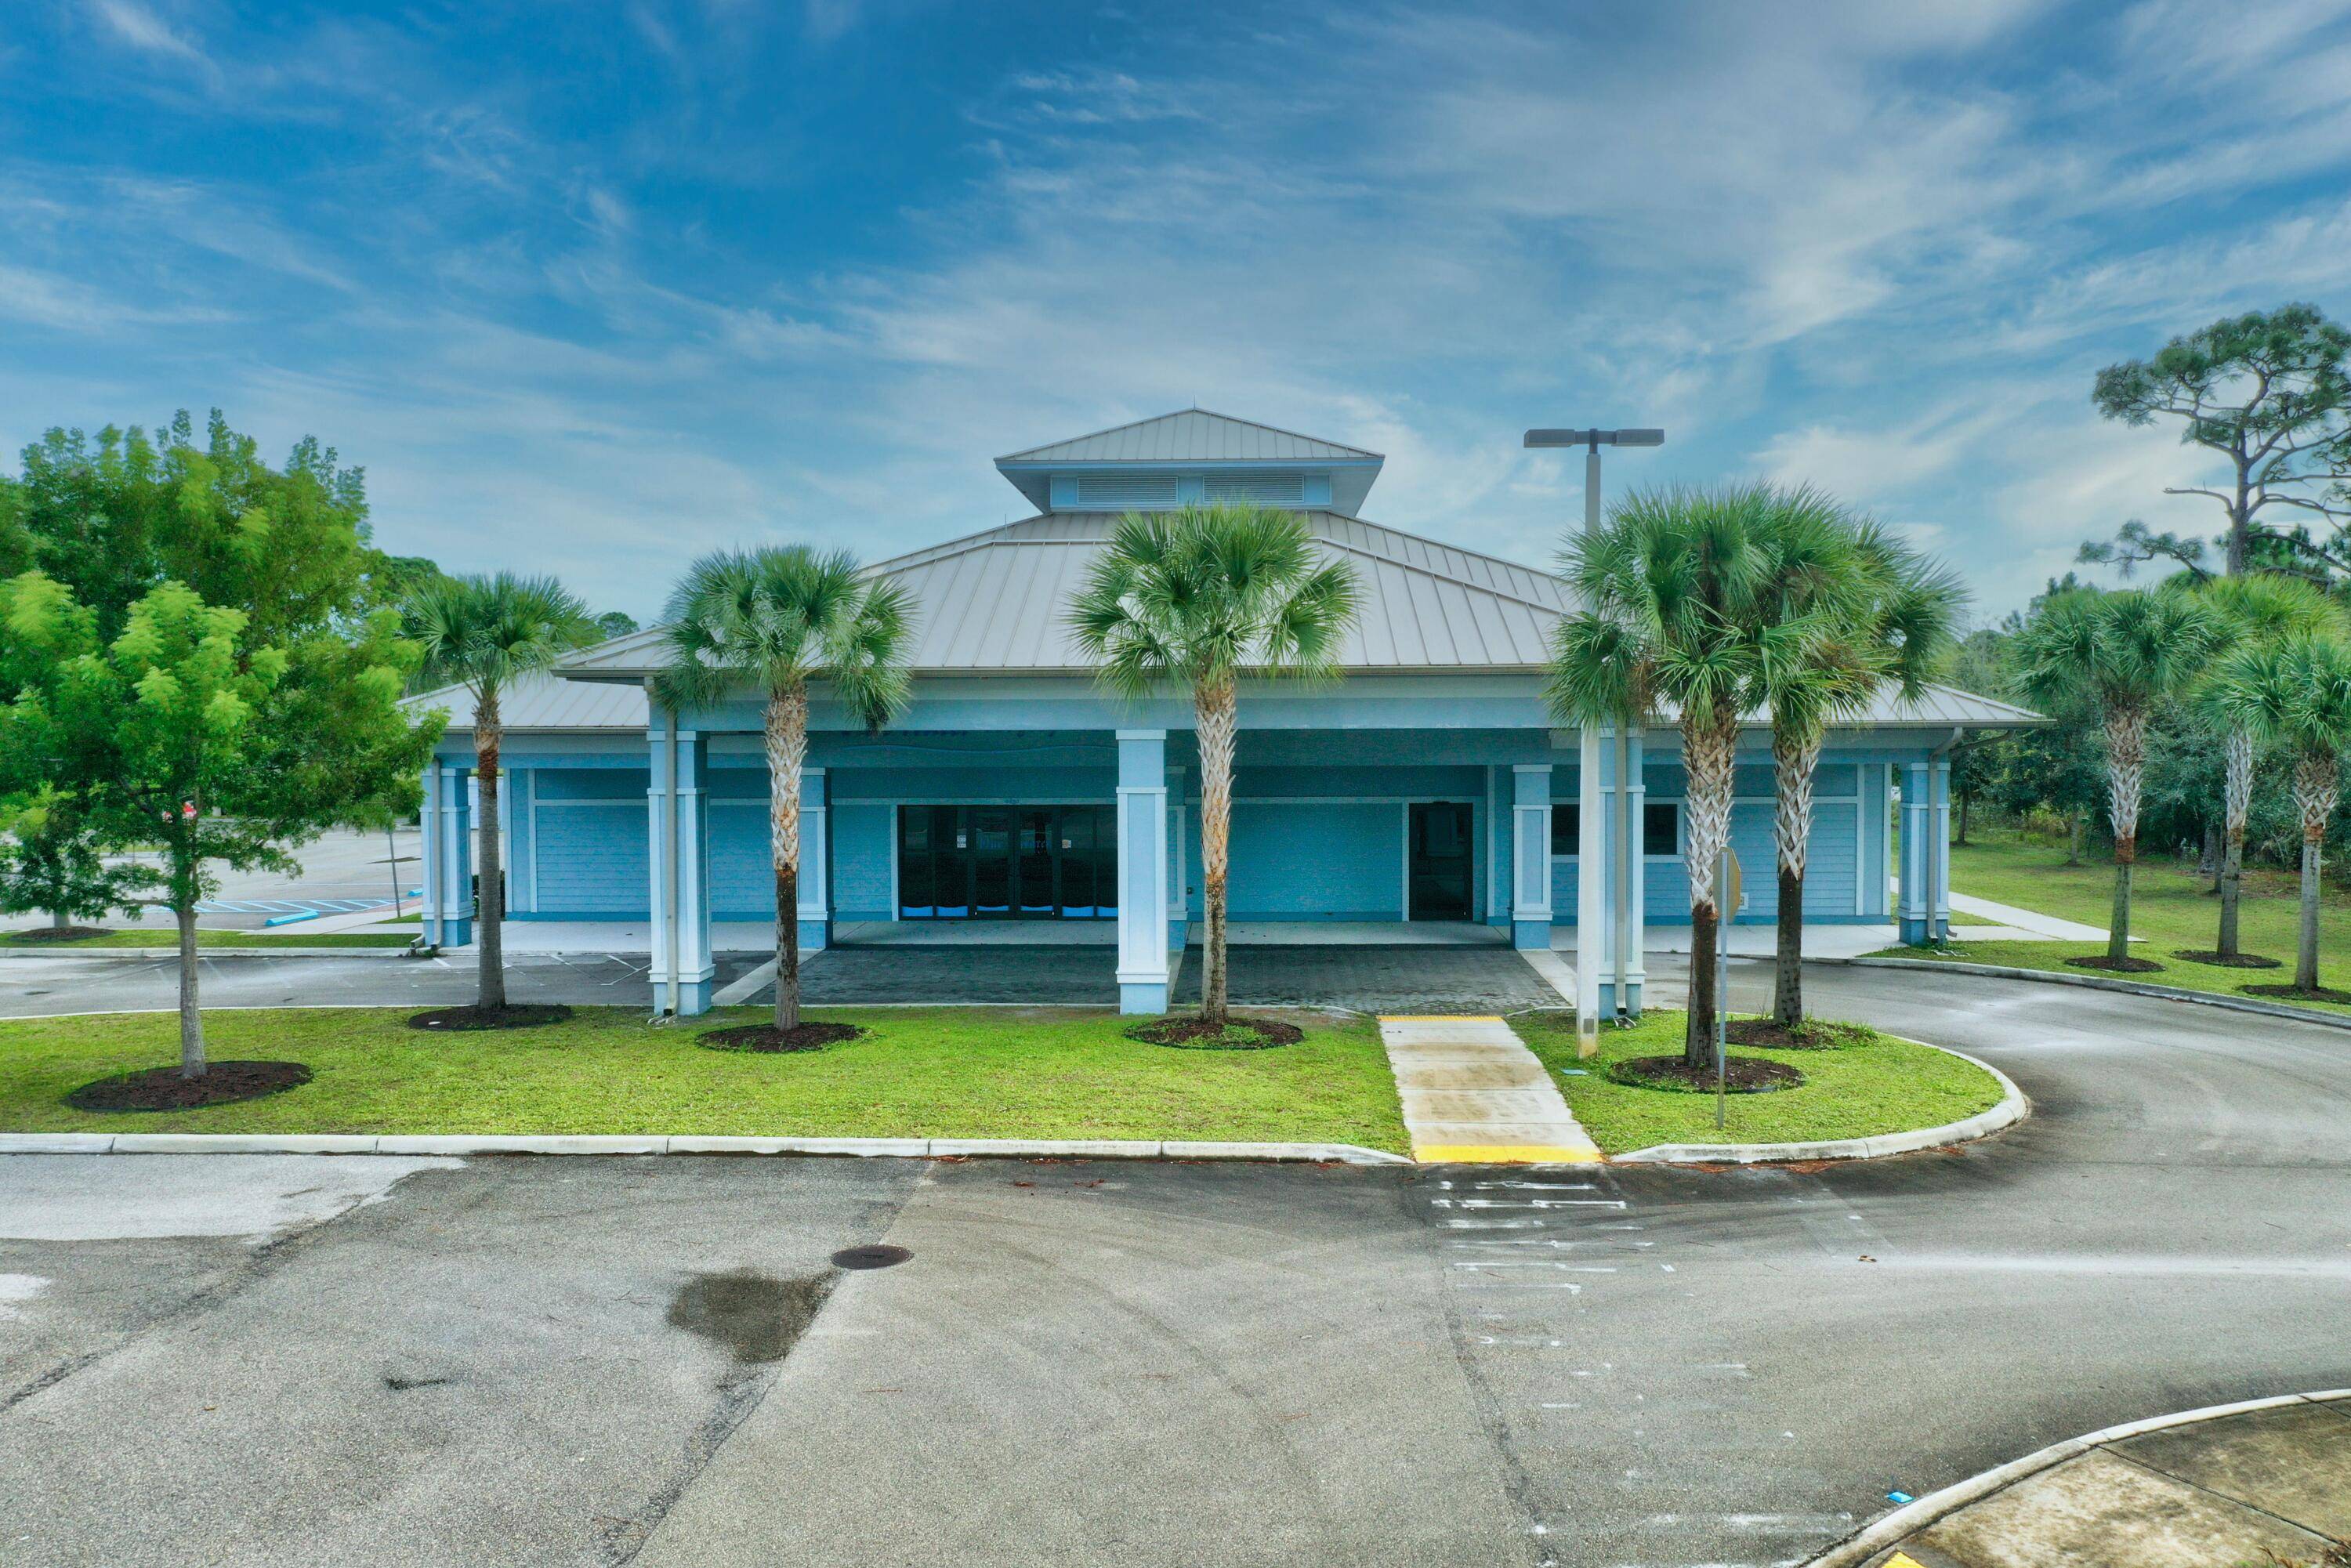 Nestled in the heart of Florida's Treasure Coast, this state of the art ambulatory surgery center is a beacon of medical excellence.